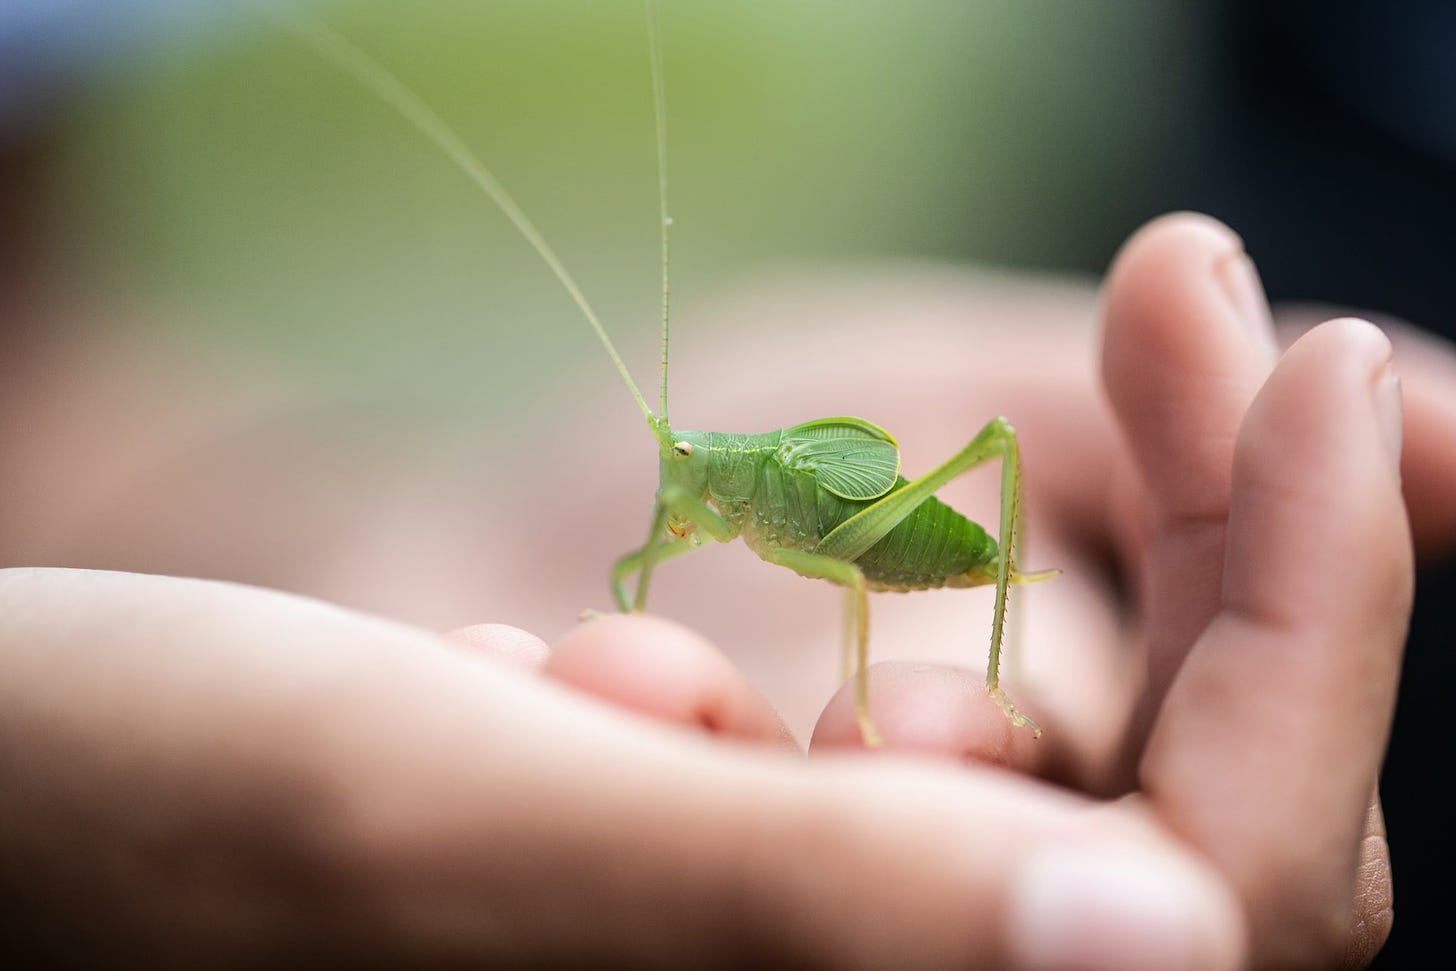 A grasshopper sits in an unseen person's hand.